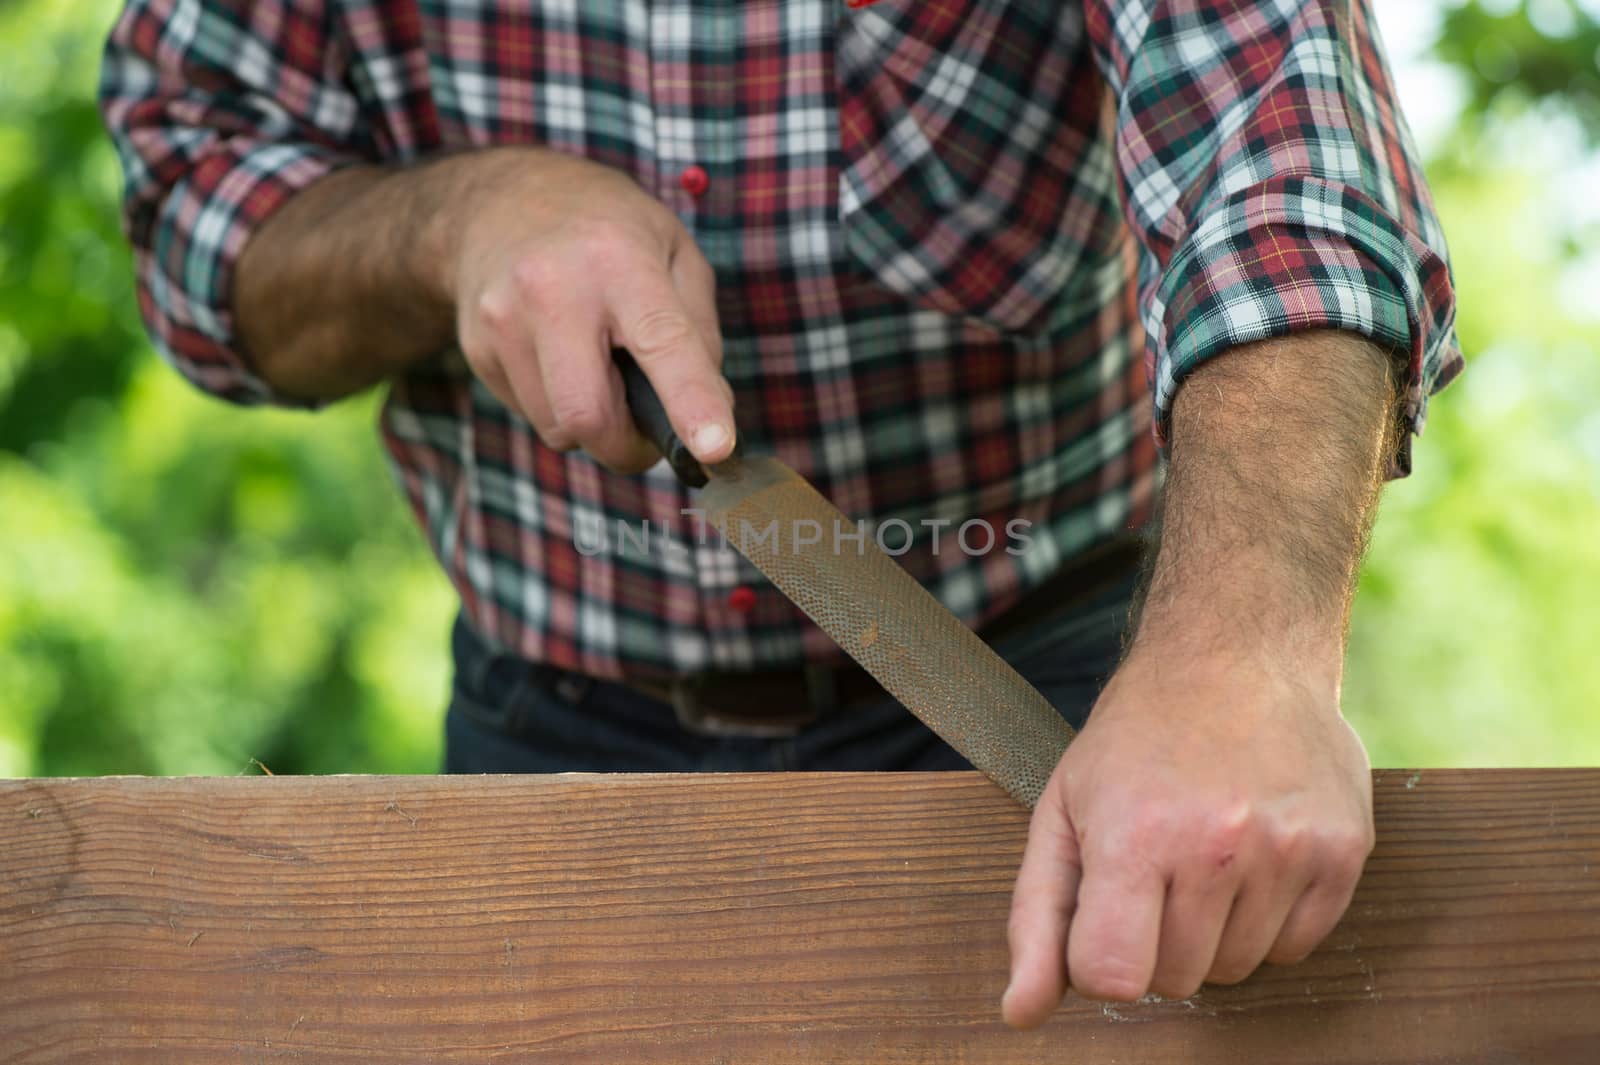 Carpenter using a wood rasp on the edge of a board outdoor